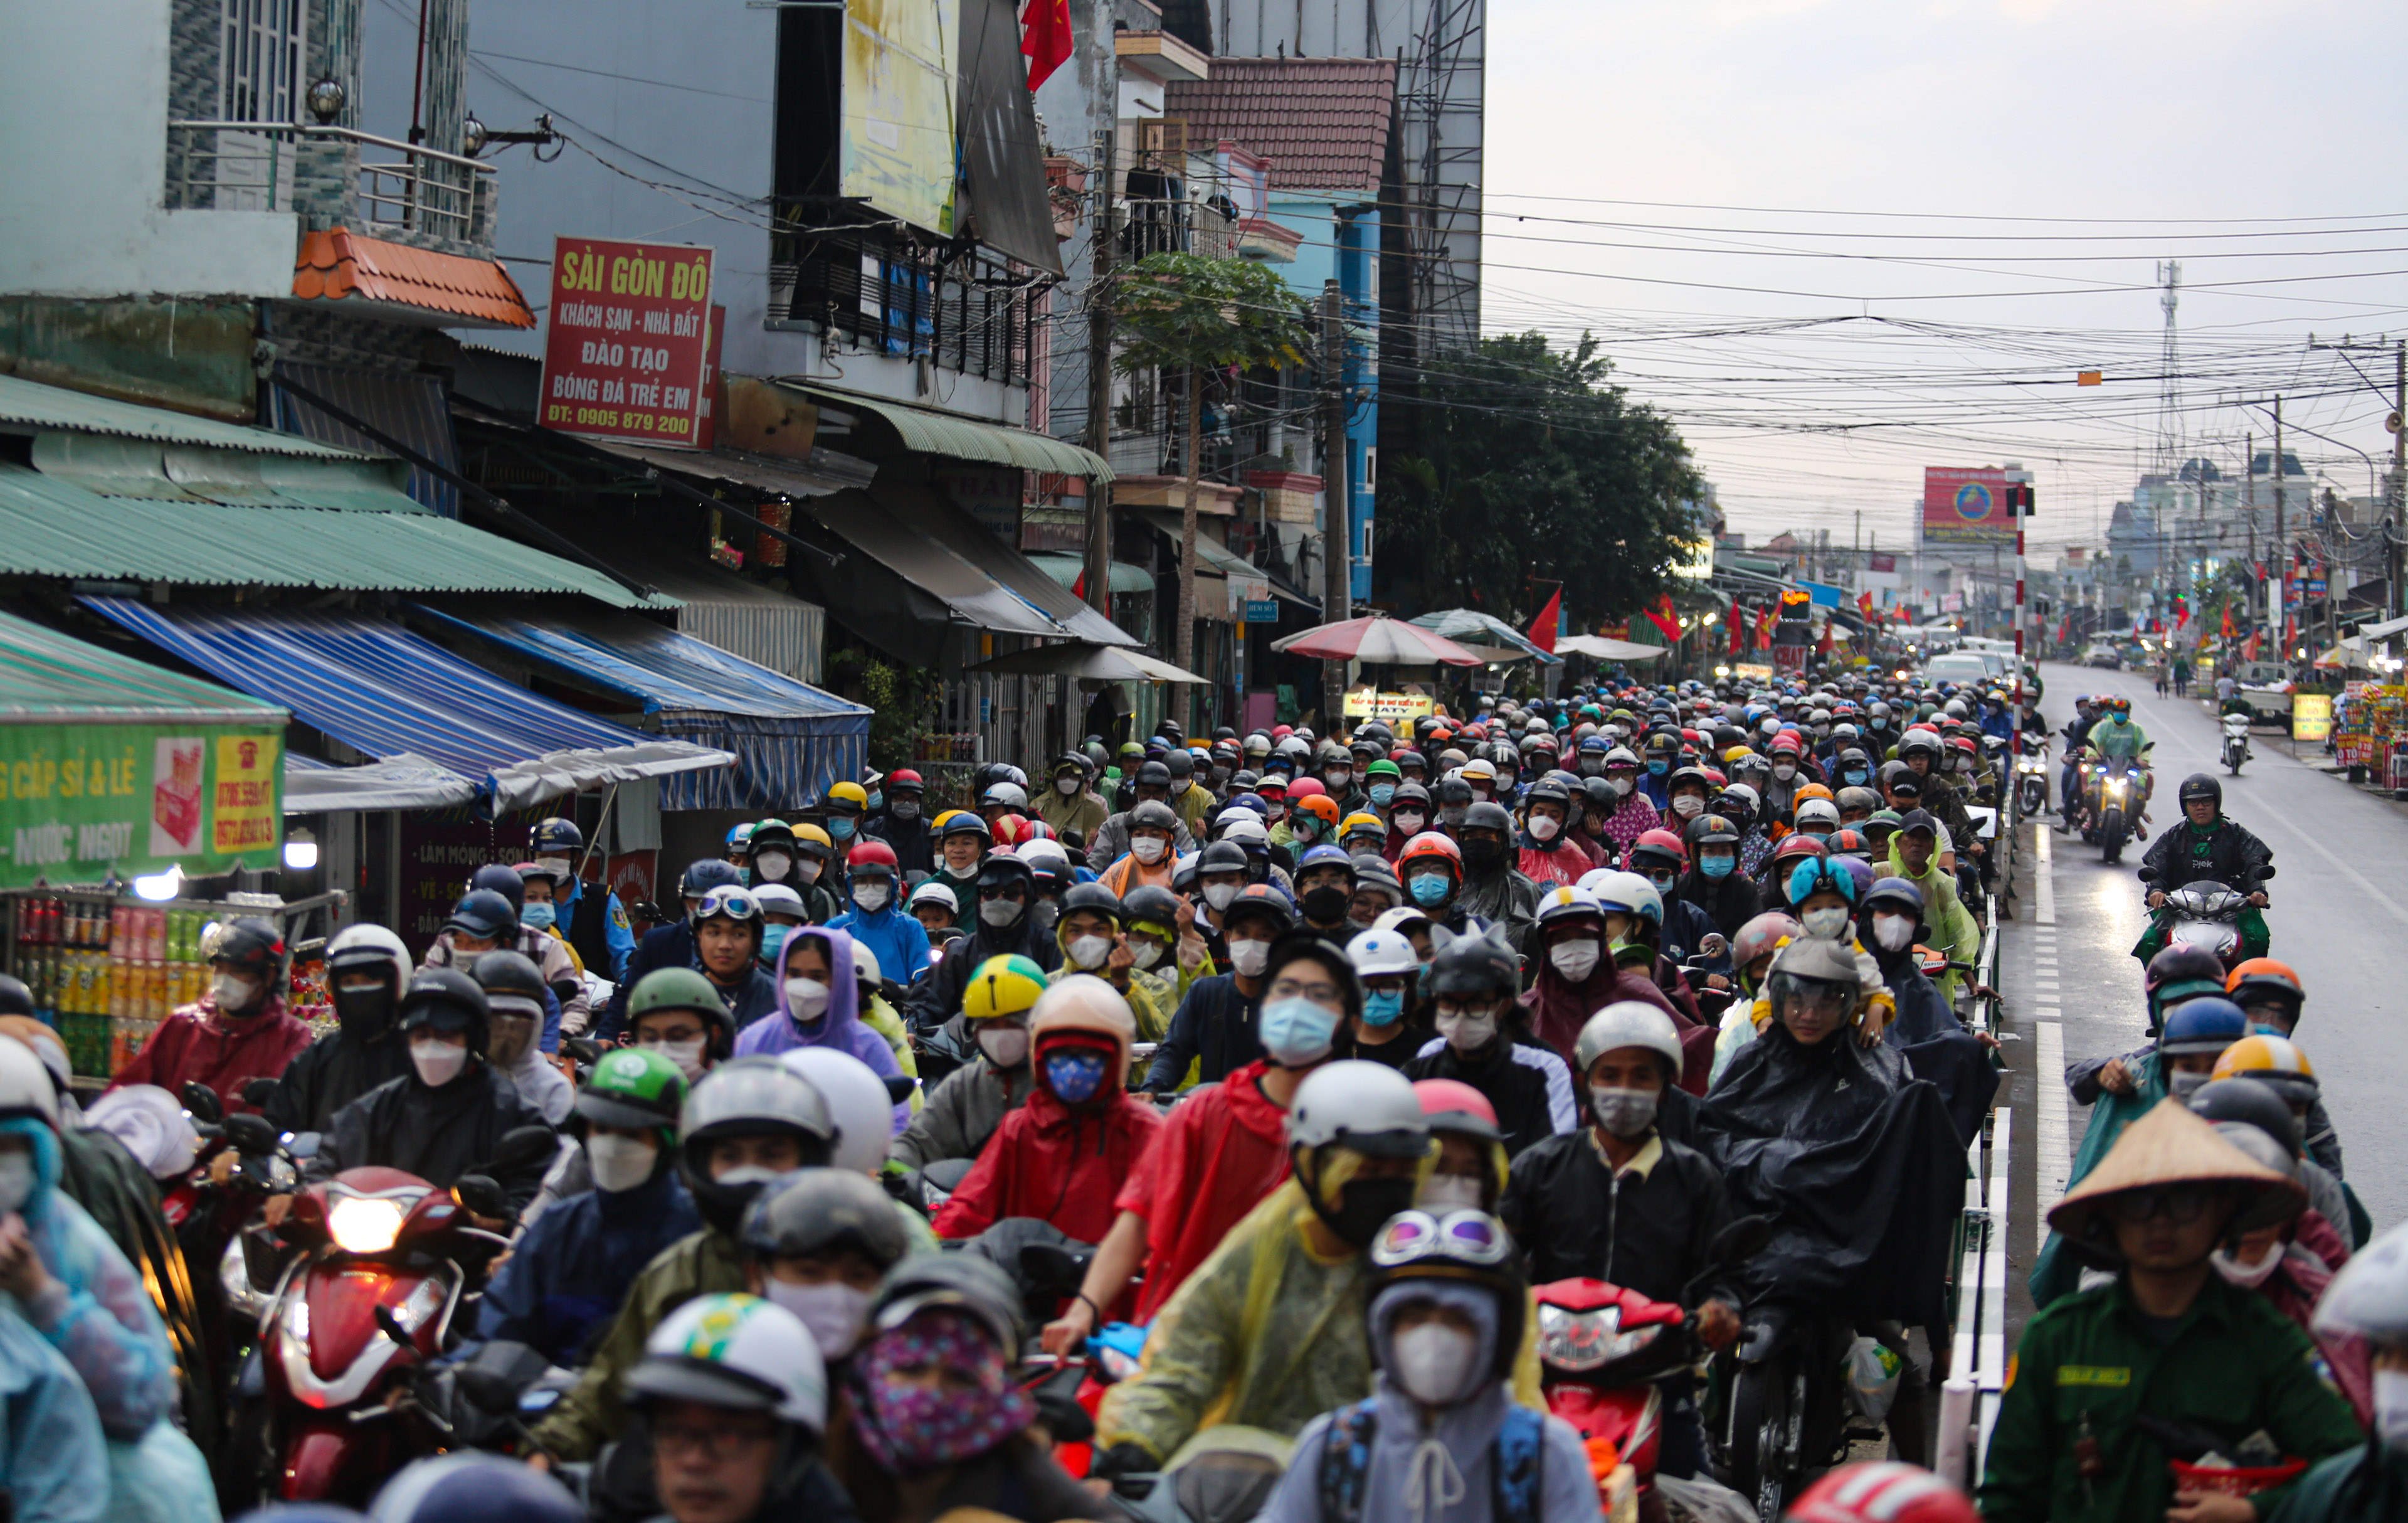 Road to ferry route linked with Ho Chi Minh City jammed as long weekend ends